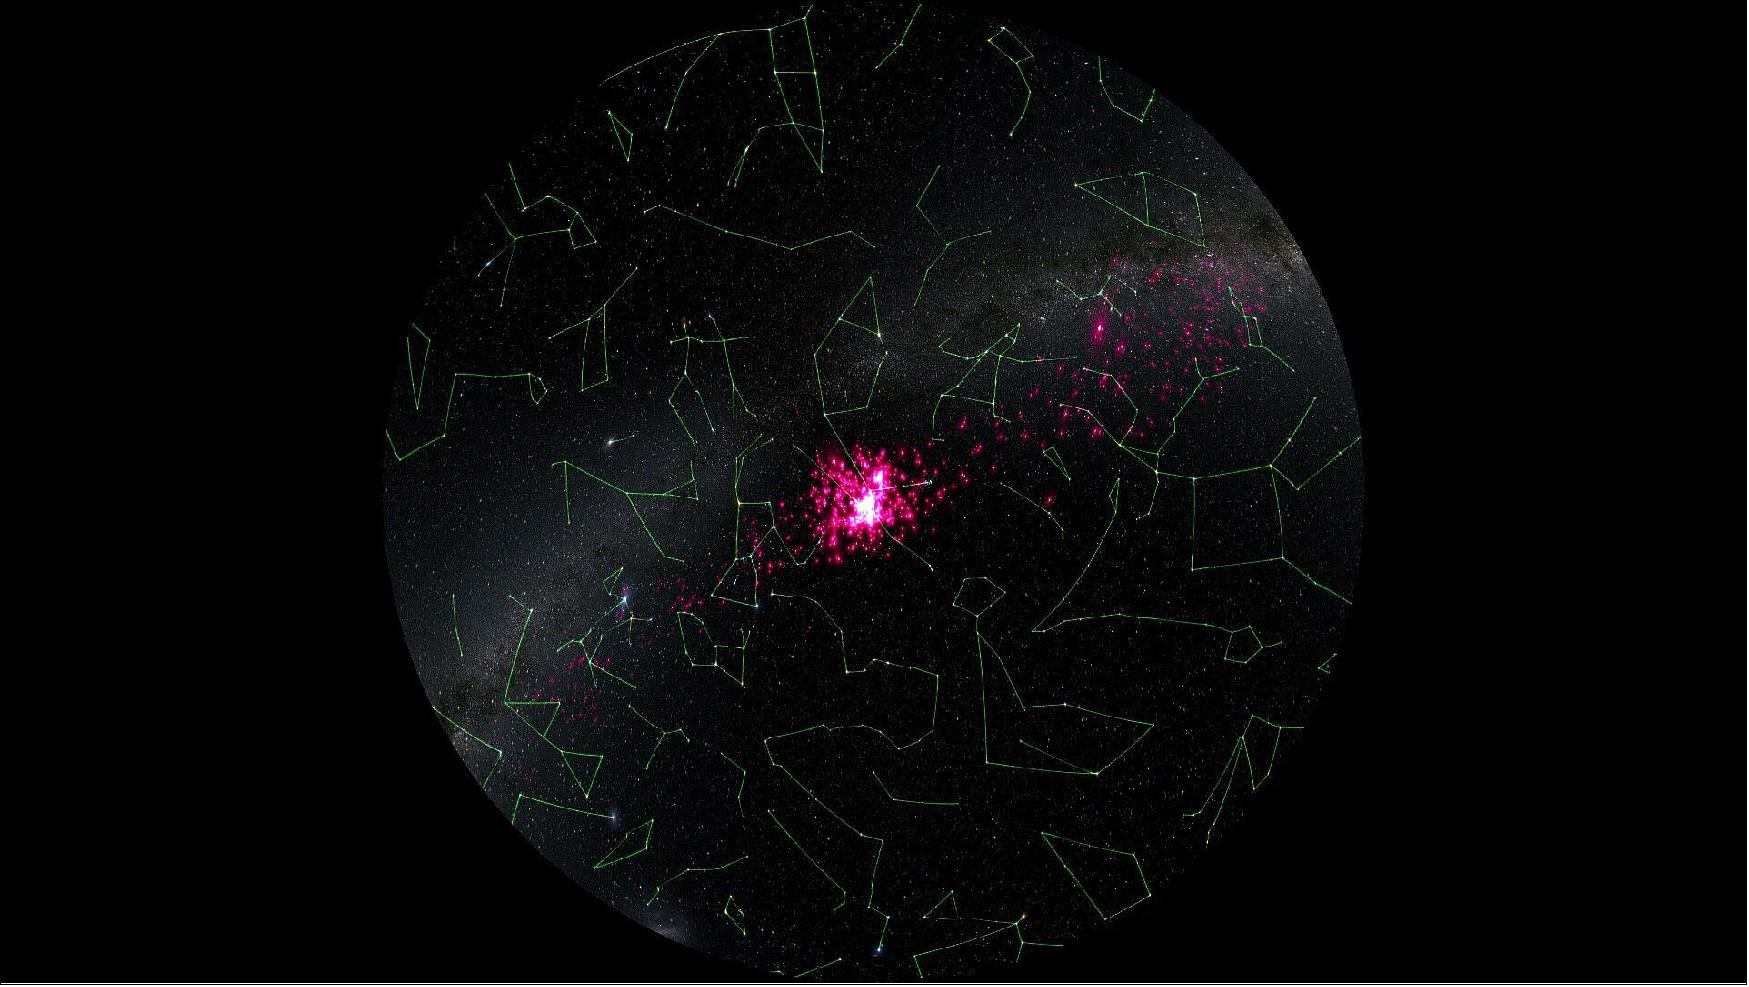 Figure 44: The Hyades and their tidal tails. The true extent of the Hyades tidal tails have been revealed for the first time by data from the ESA’s Gaia mission. The Gaia data has allowed the former members of the star cluster (shown in pink) to be traced across the whole sky. Those stars are marked in pink, and the shapes of the various constellations are traced in green. The image was created using Gaia Sky (image credit: ESA/Gaia/DPAC, CC BY-SA 3.0 IGO; acknowledgement: S. Jordan/T. Sagrista)